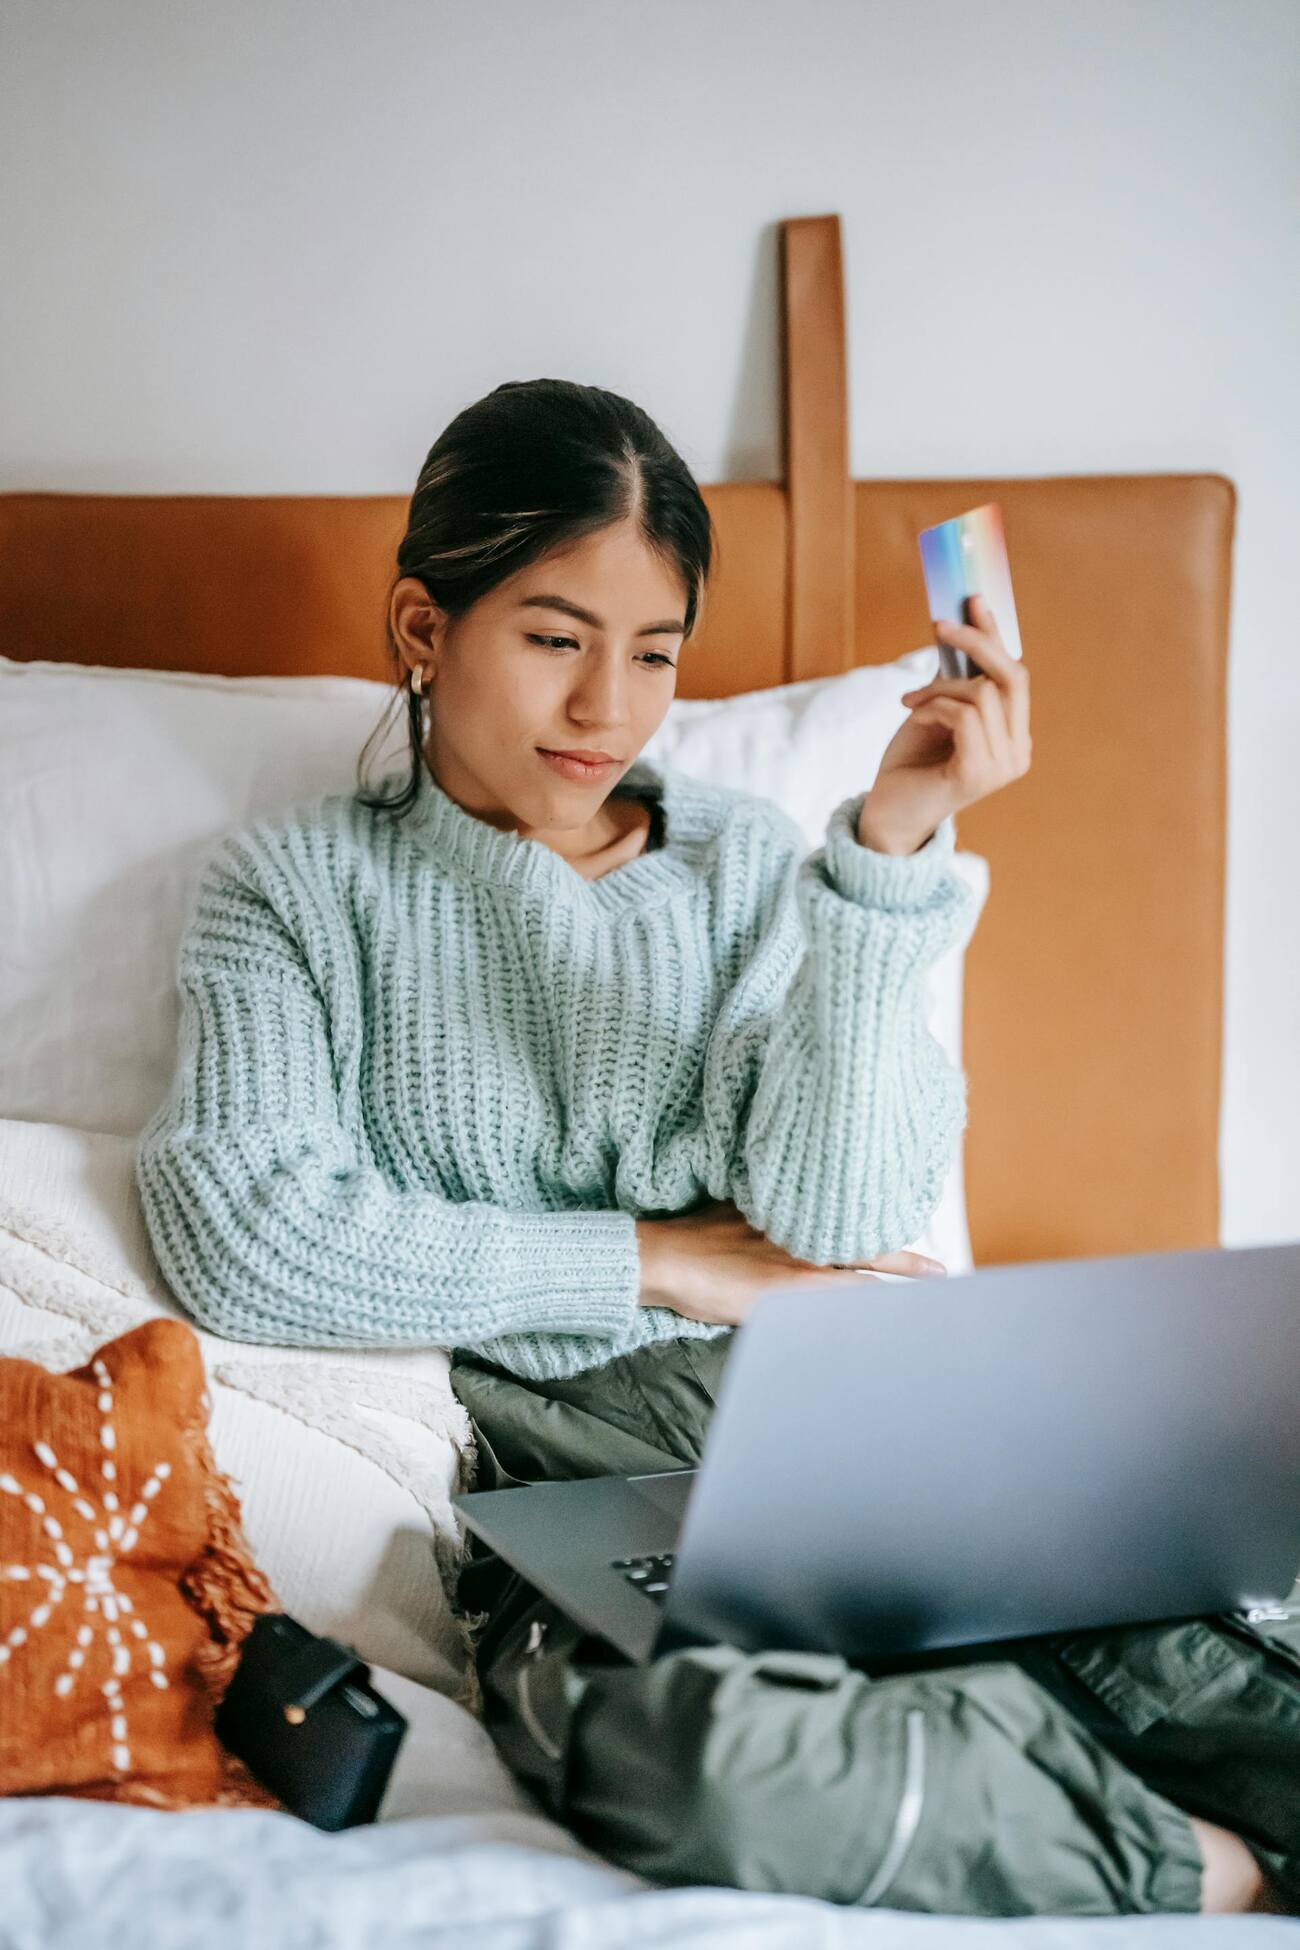 A woman sitting on a bed holding a credit card, engrossed in her laptop